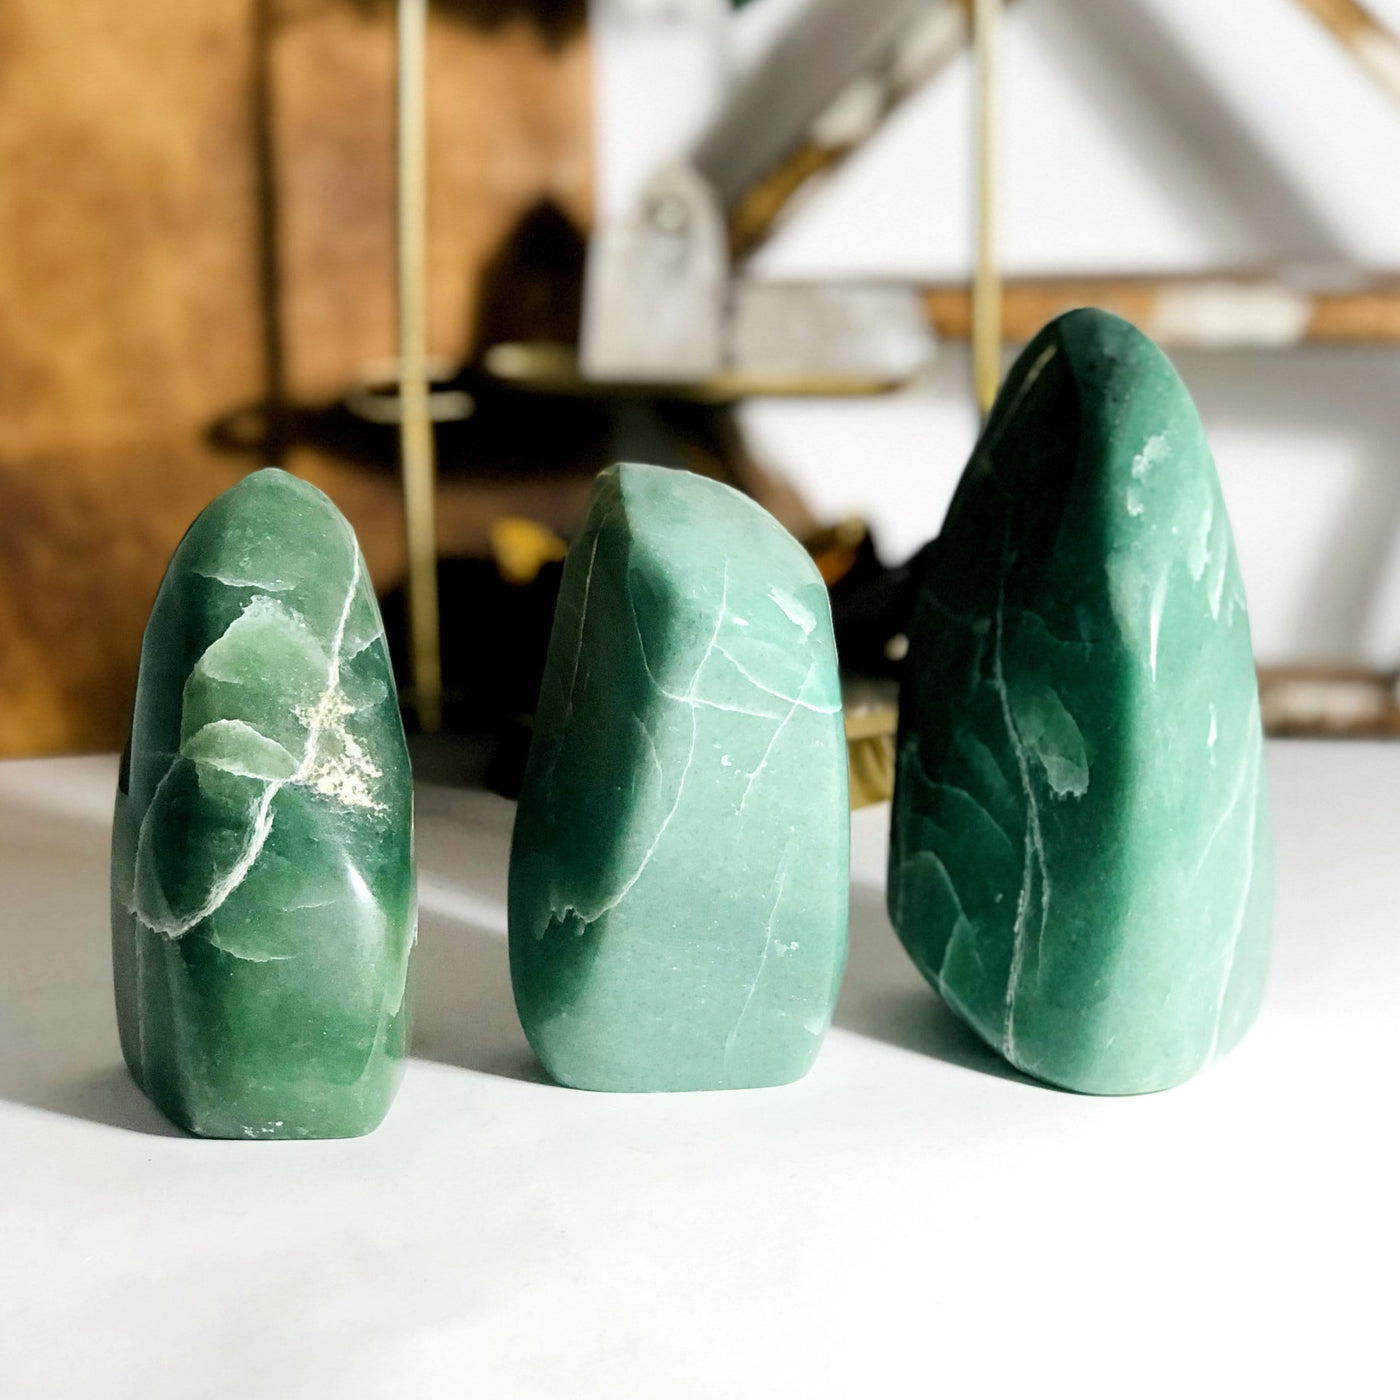 3 aventurine cut bases with shelves blurred in the background